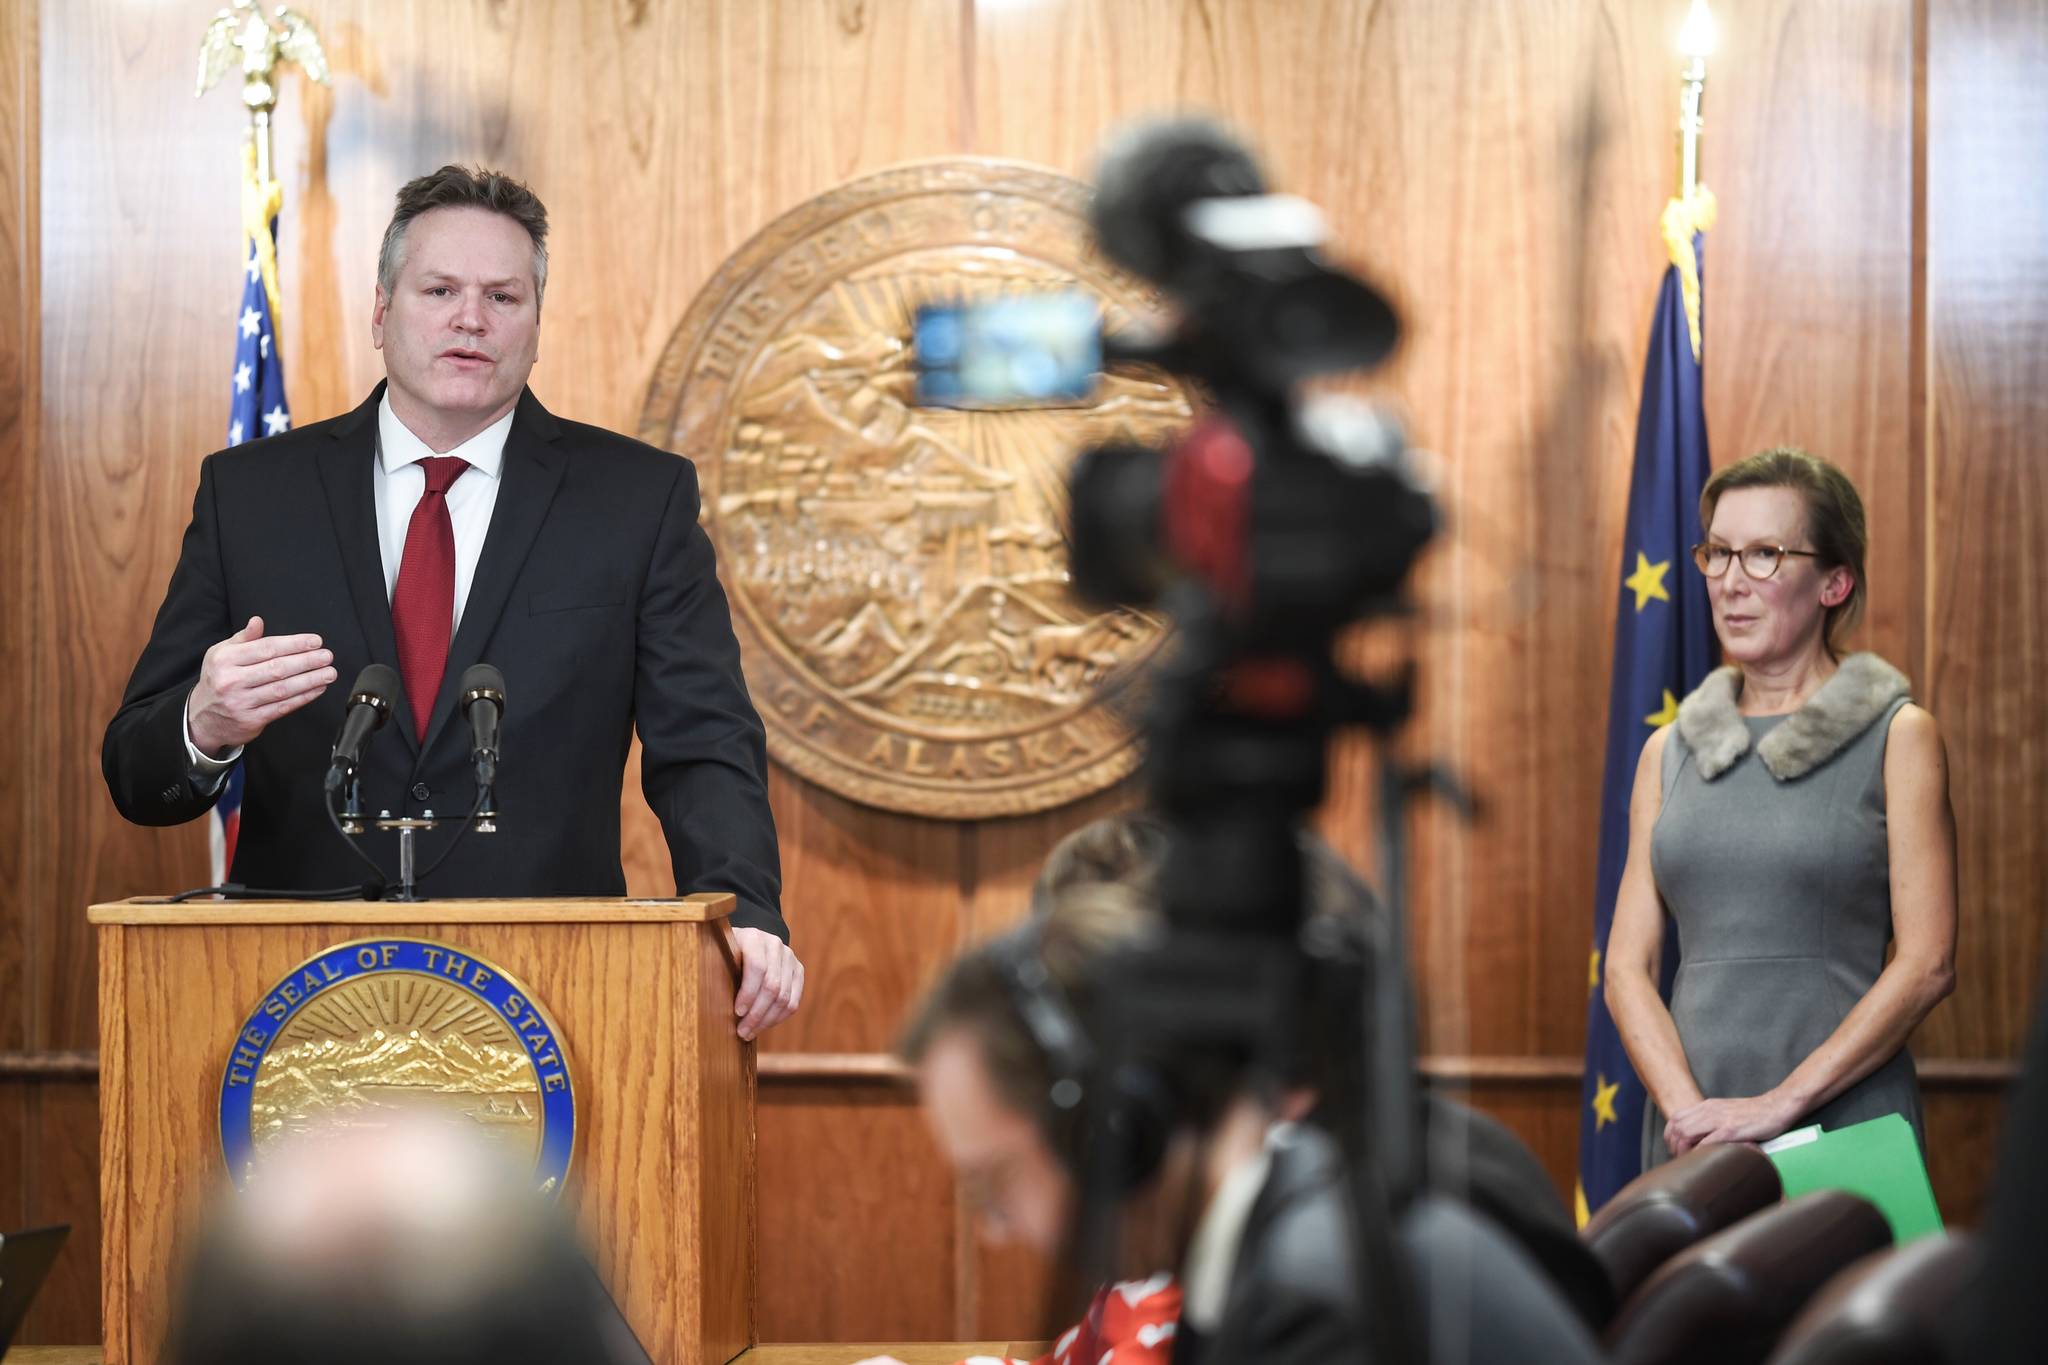 Gov. Mike Dunleavy speaks about his budget as OMB Director Donna Arduin listens during a press conference to announce the state’s budget on Wednesday, Feb. 13, 2019. (Michael Penn | Juneau Empire)